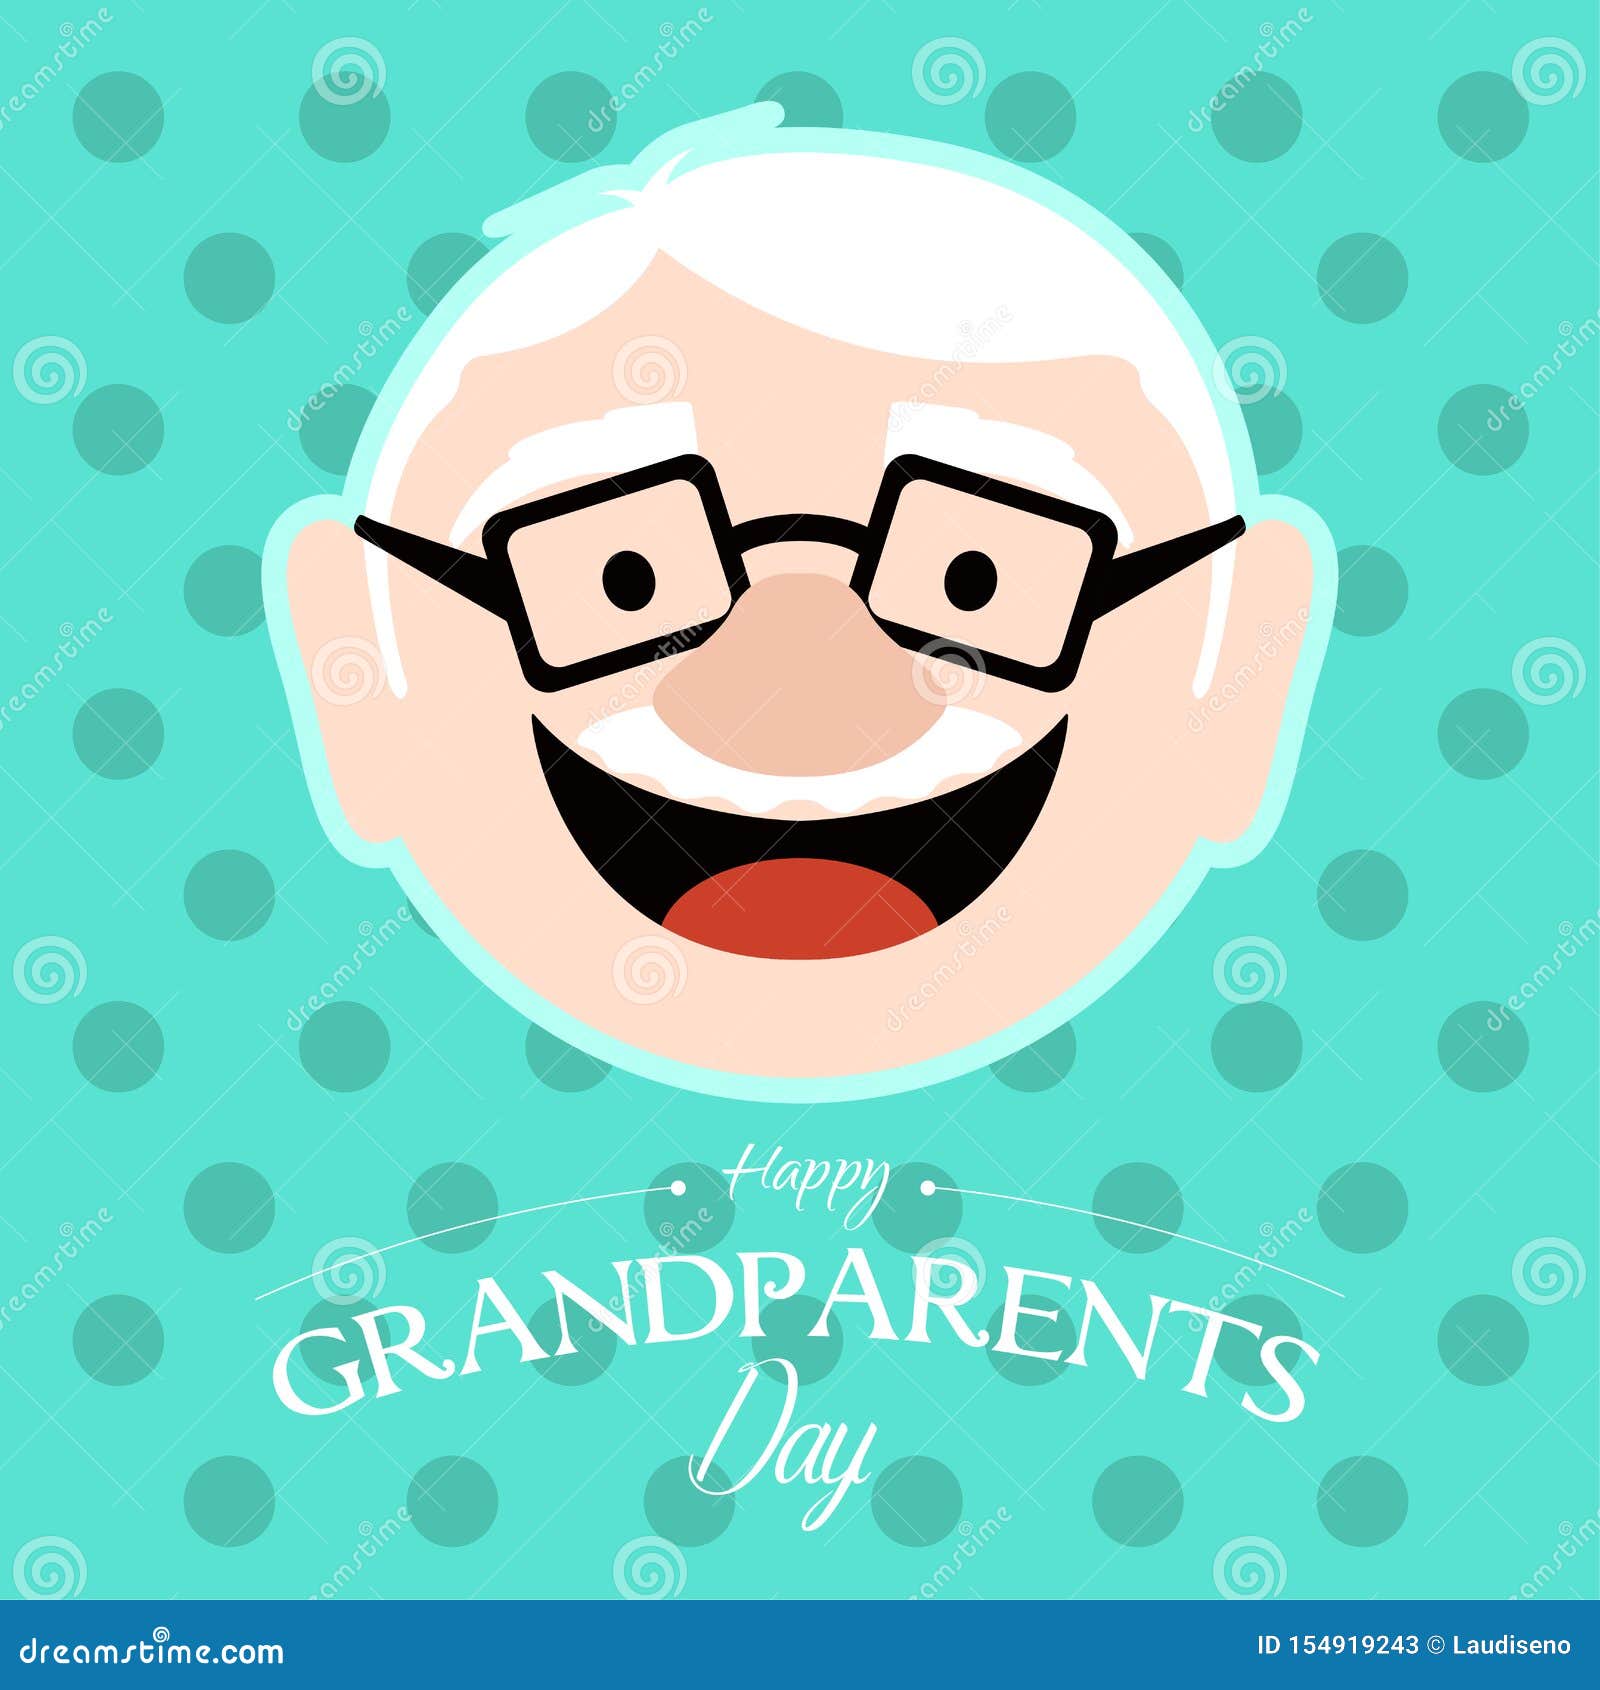 Download Happy Grandparents Day Stock Vector Illustration Of Holiday 154919243